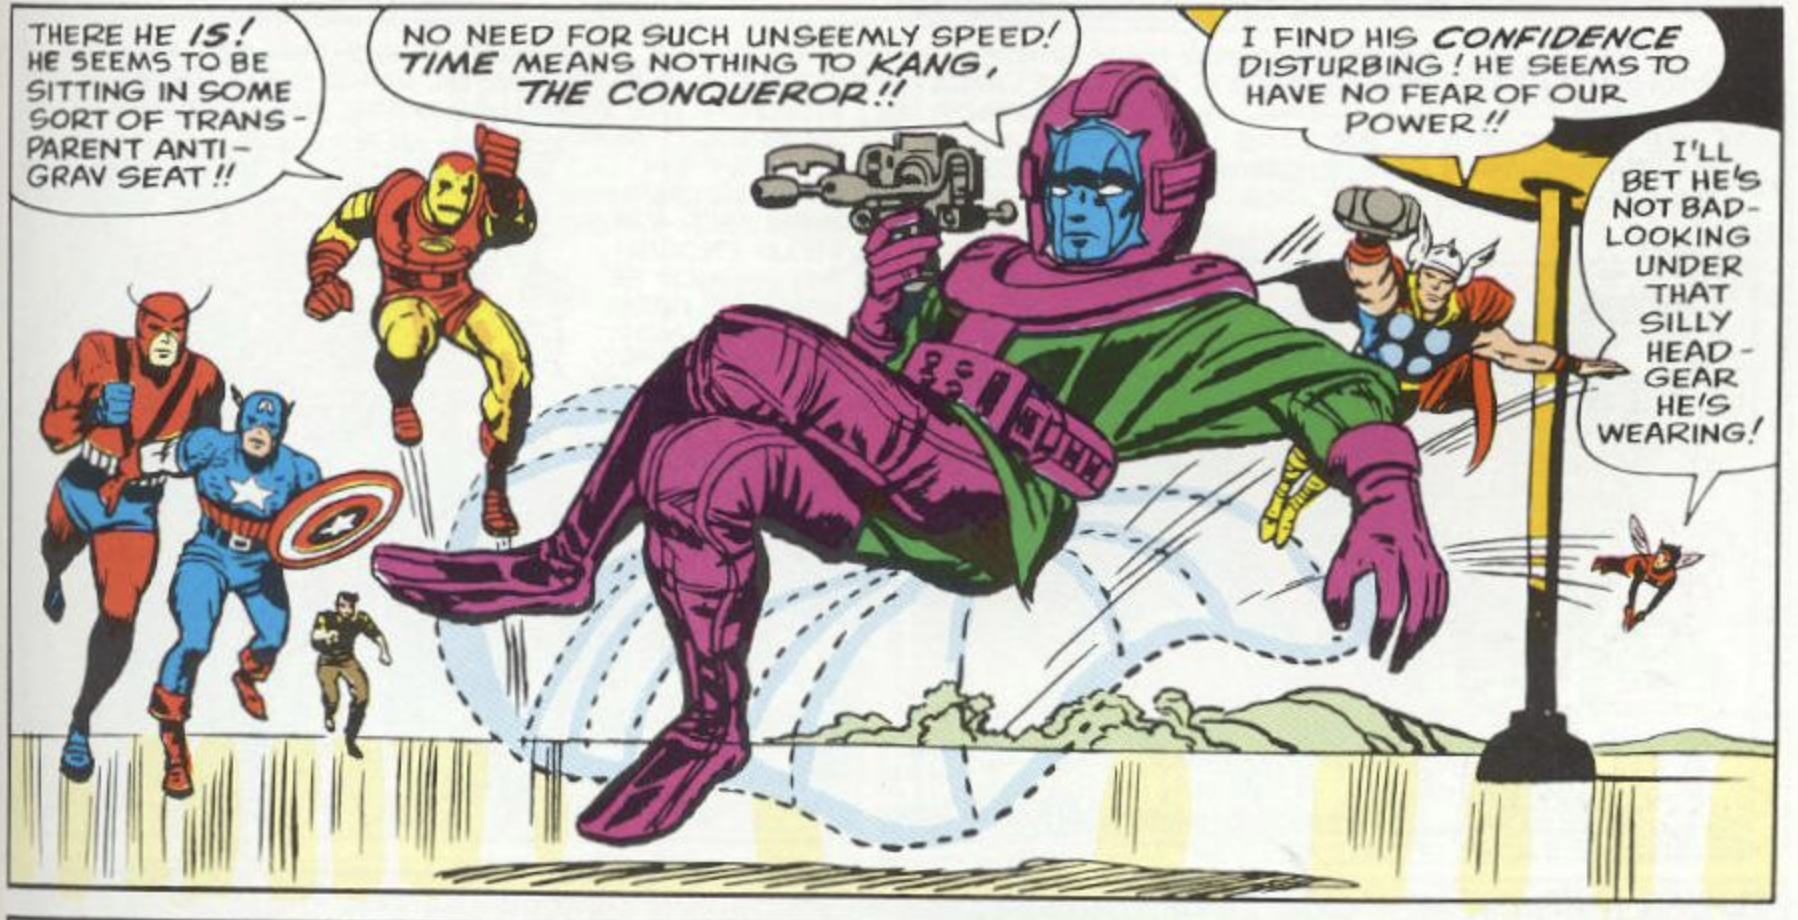 Kang the Conqueror, in a purple futuristic suit, reclining on an invisible chair while the Avengers run up to try to stop him.